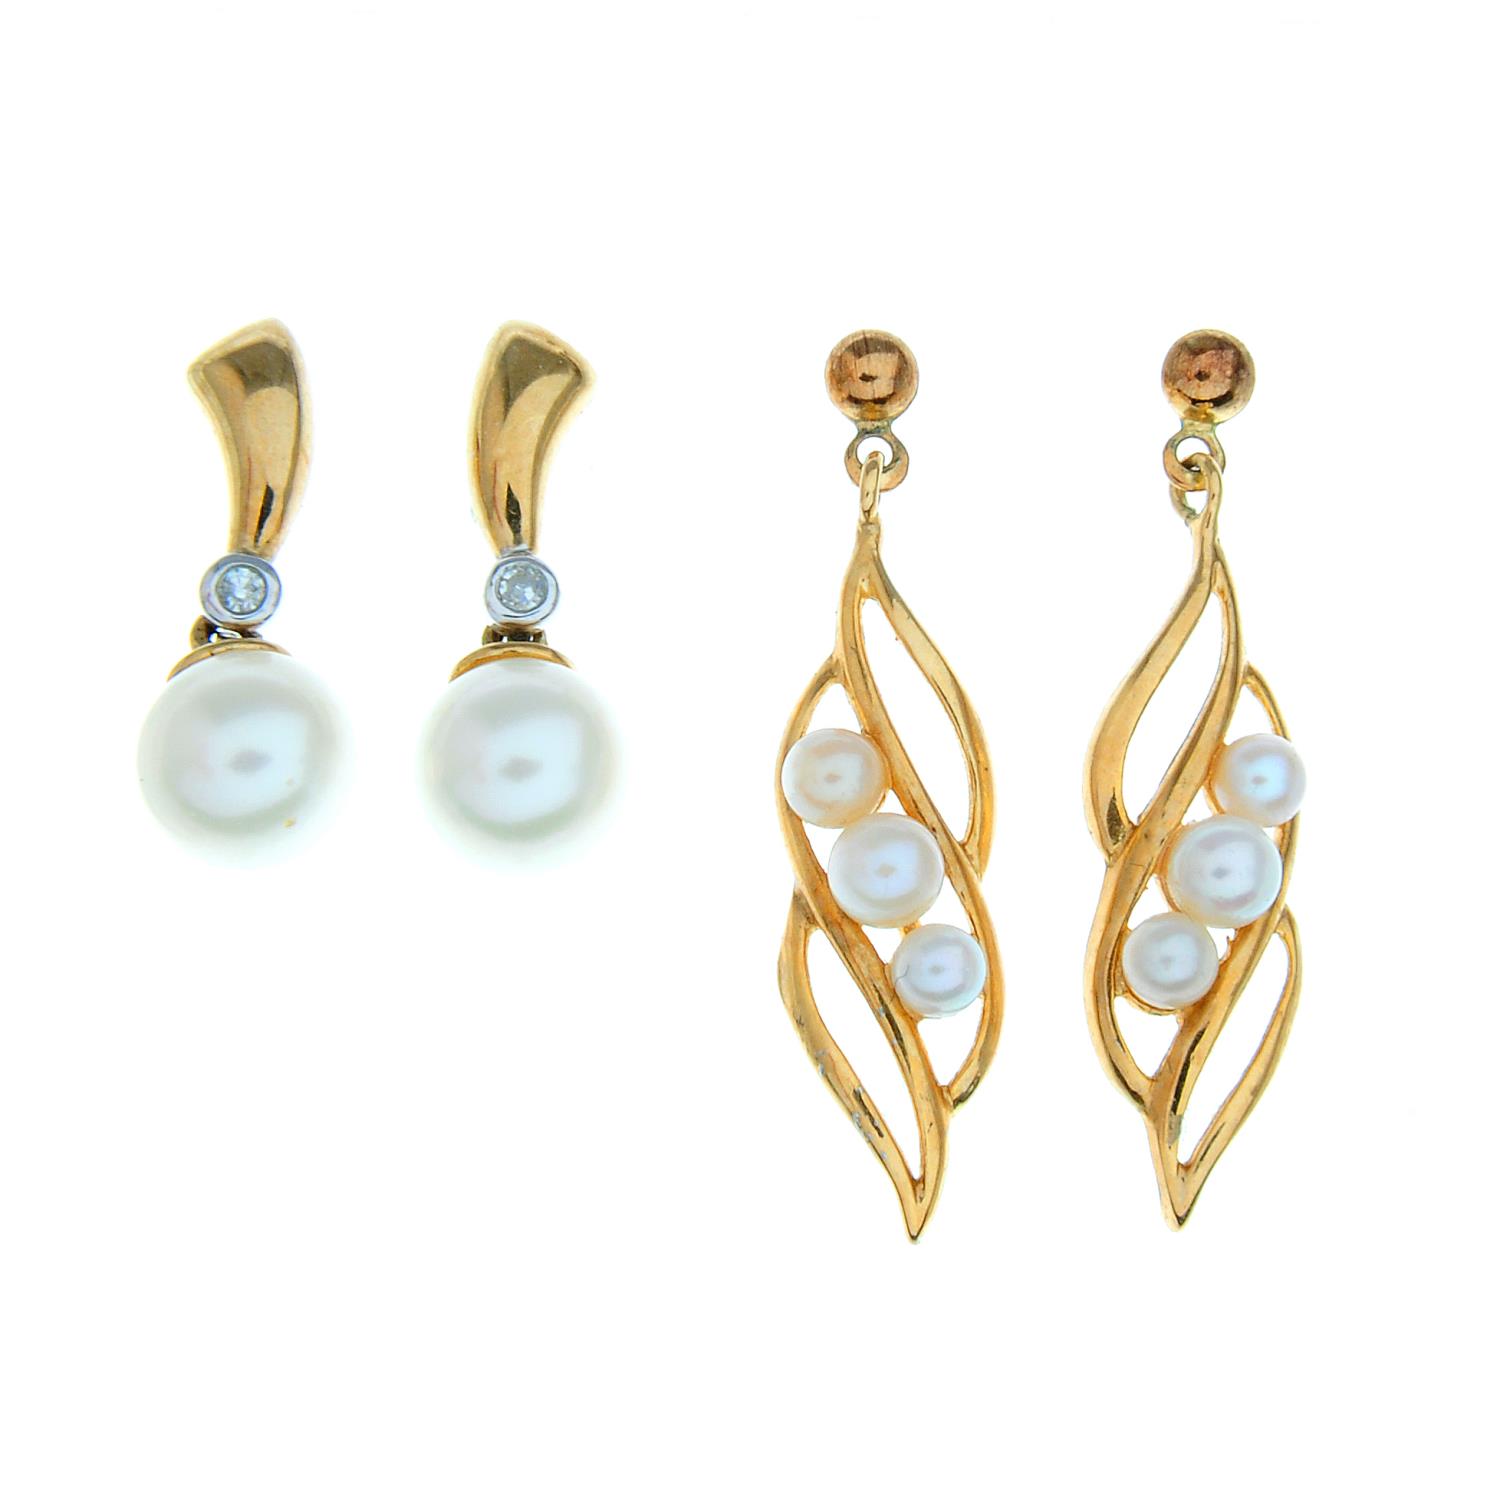 Four pairs of cultured pearl earrings, together with a pair of jade stud earrings. - Image 2 of 3